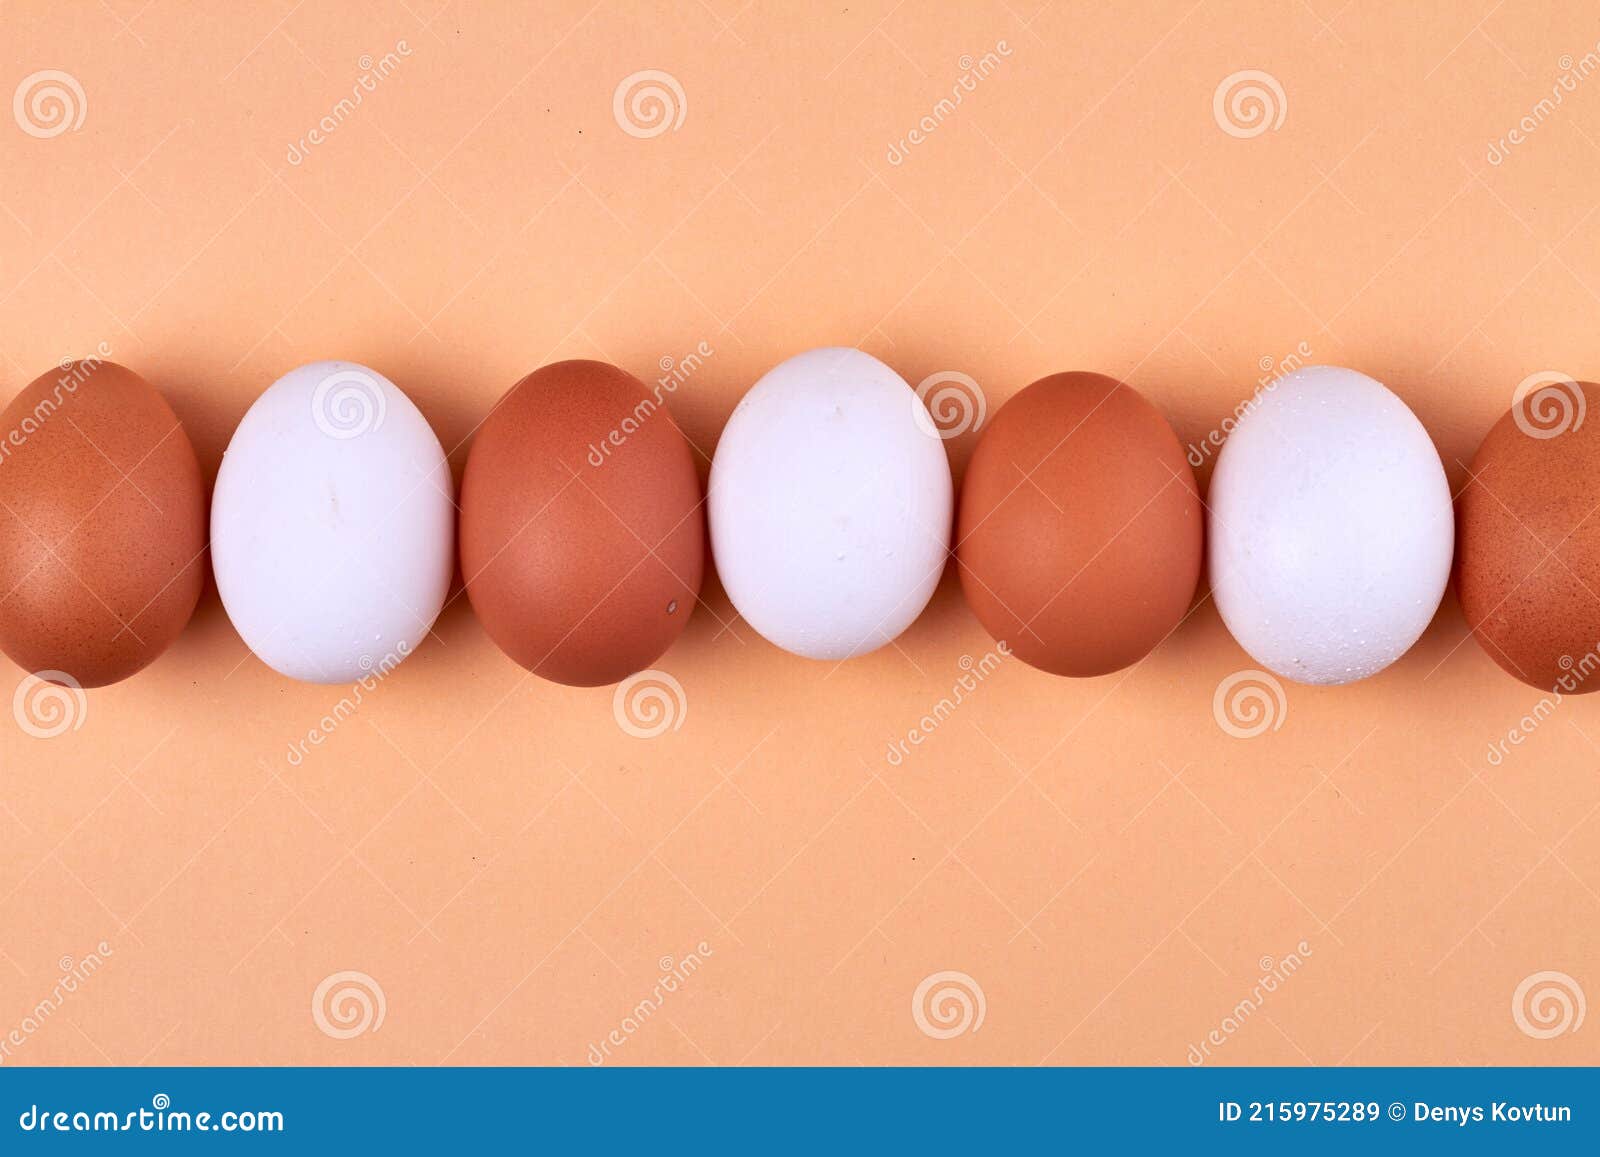 alternation of white and brown eggs.